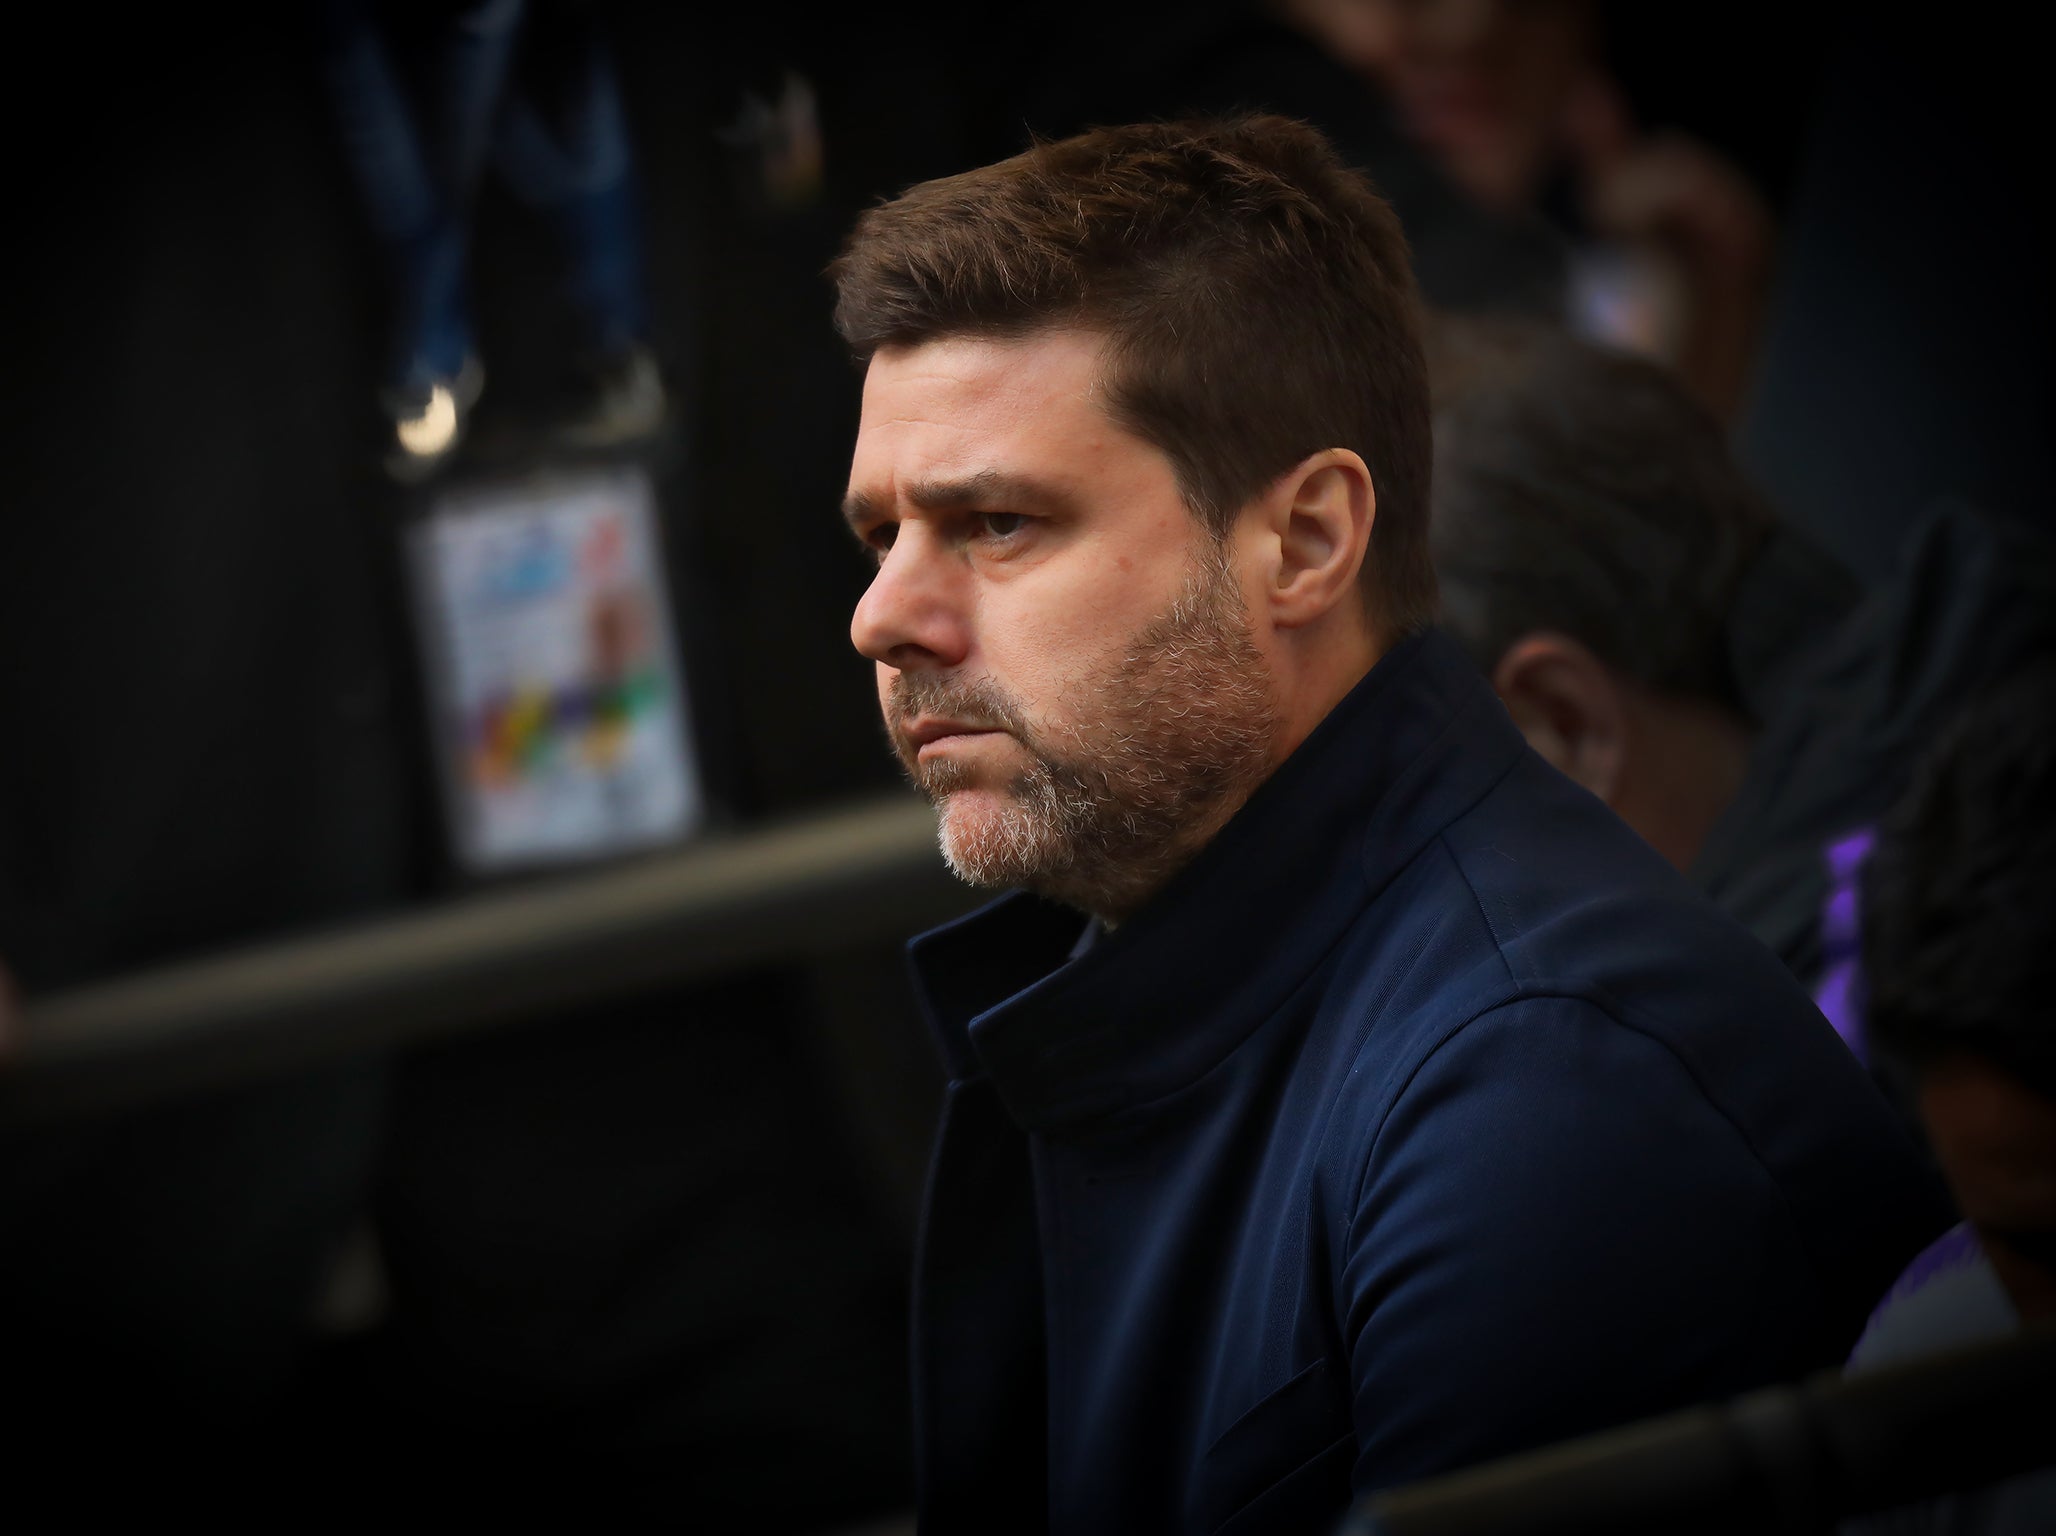 Pochettino's men will be desperate for a win as they attempt to secure a top-four spot